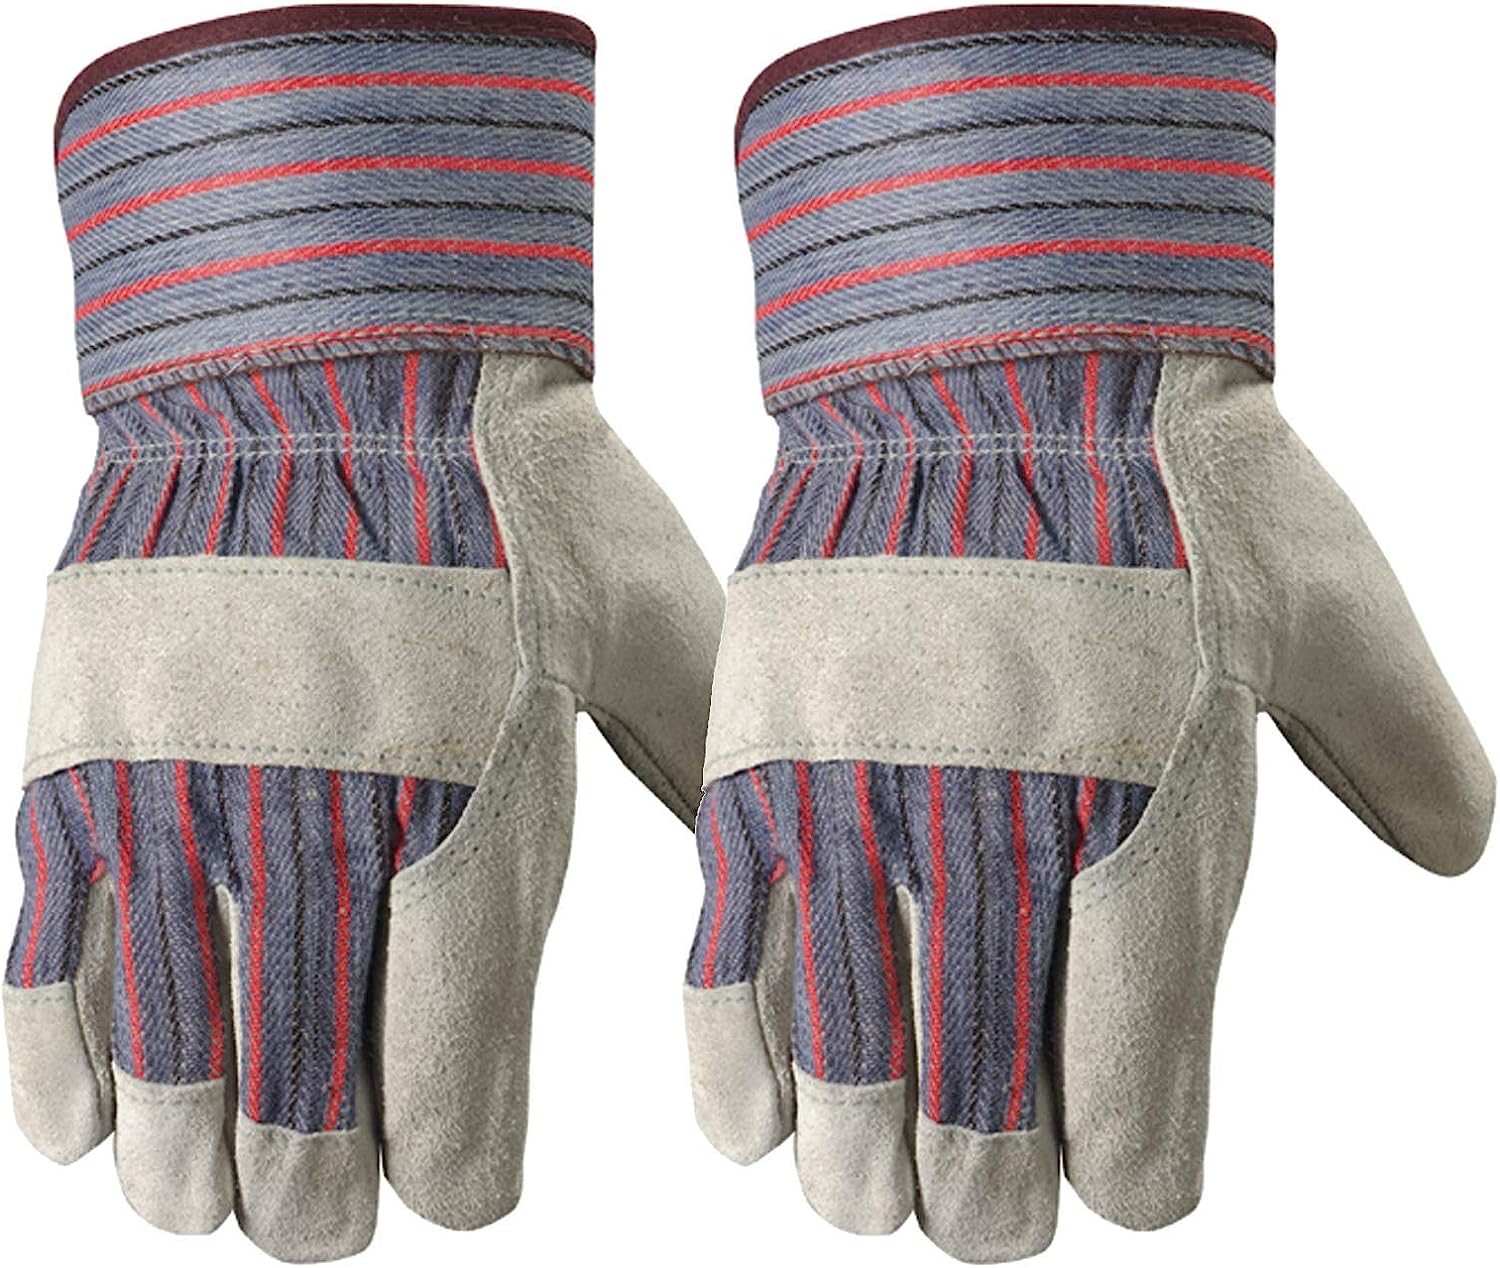 Wells Lamont 2 Pair Pack Men's Leather Work Gloves [...]